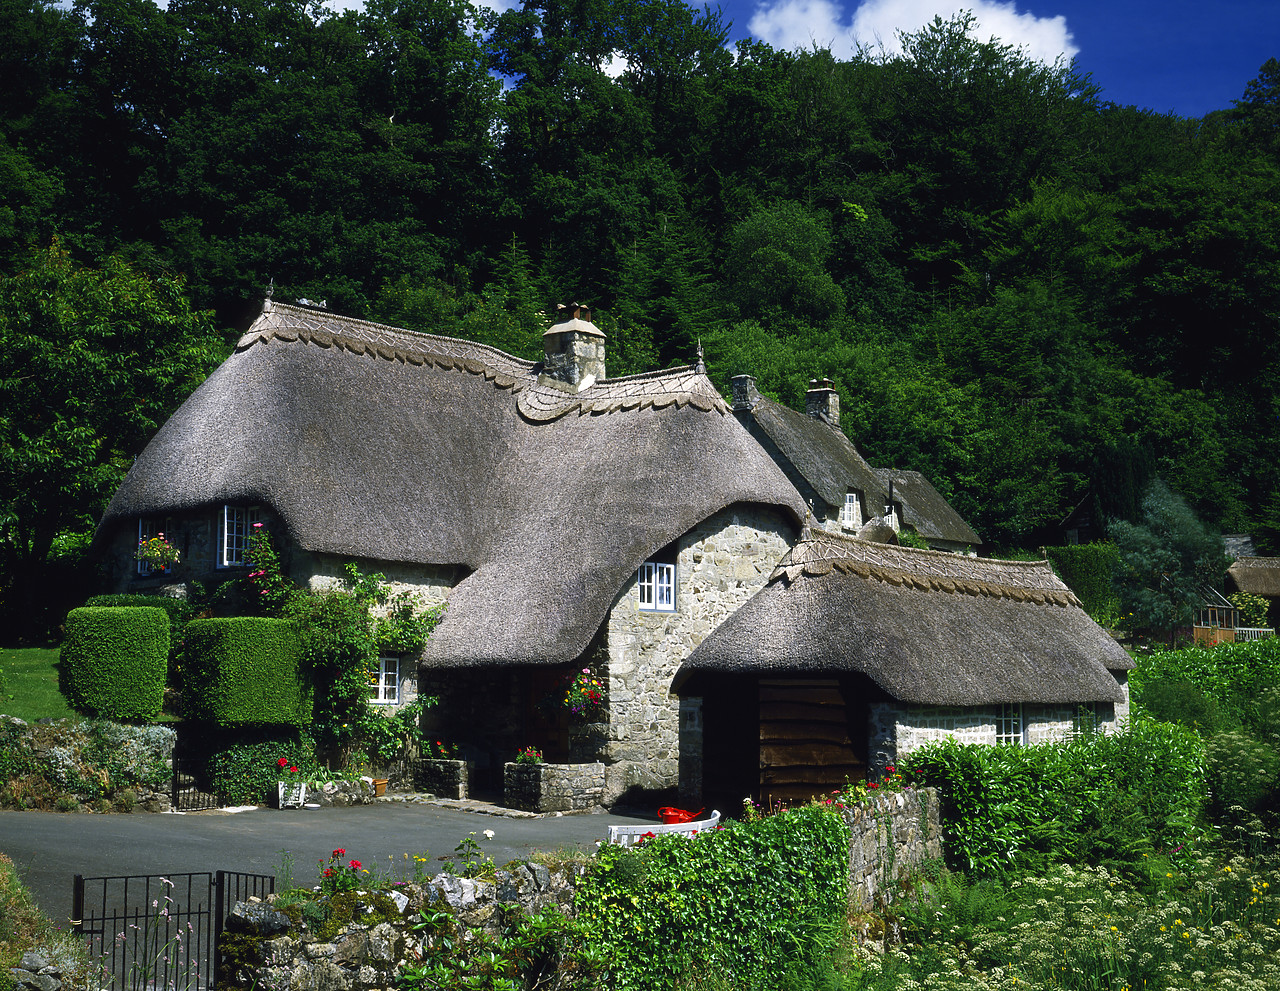 #86723-4 - Thatched Cottages, Buckland-in-the-Moor, Devon, England